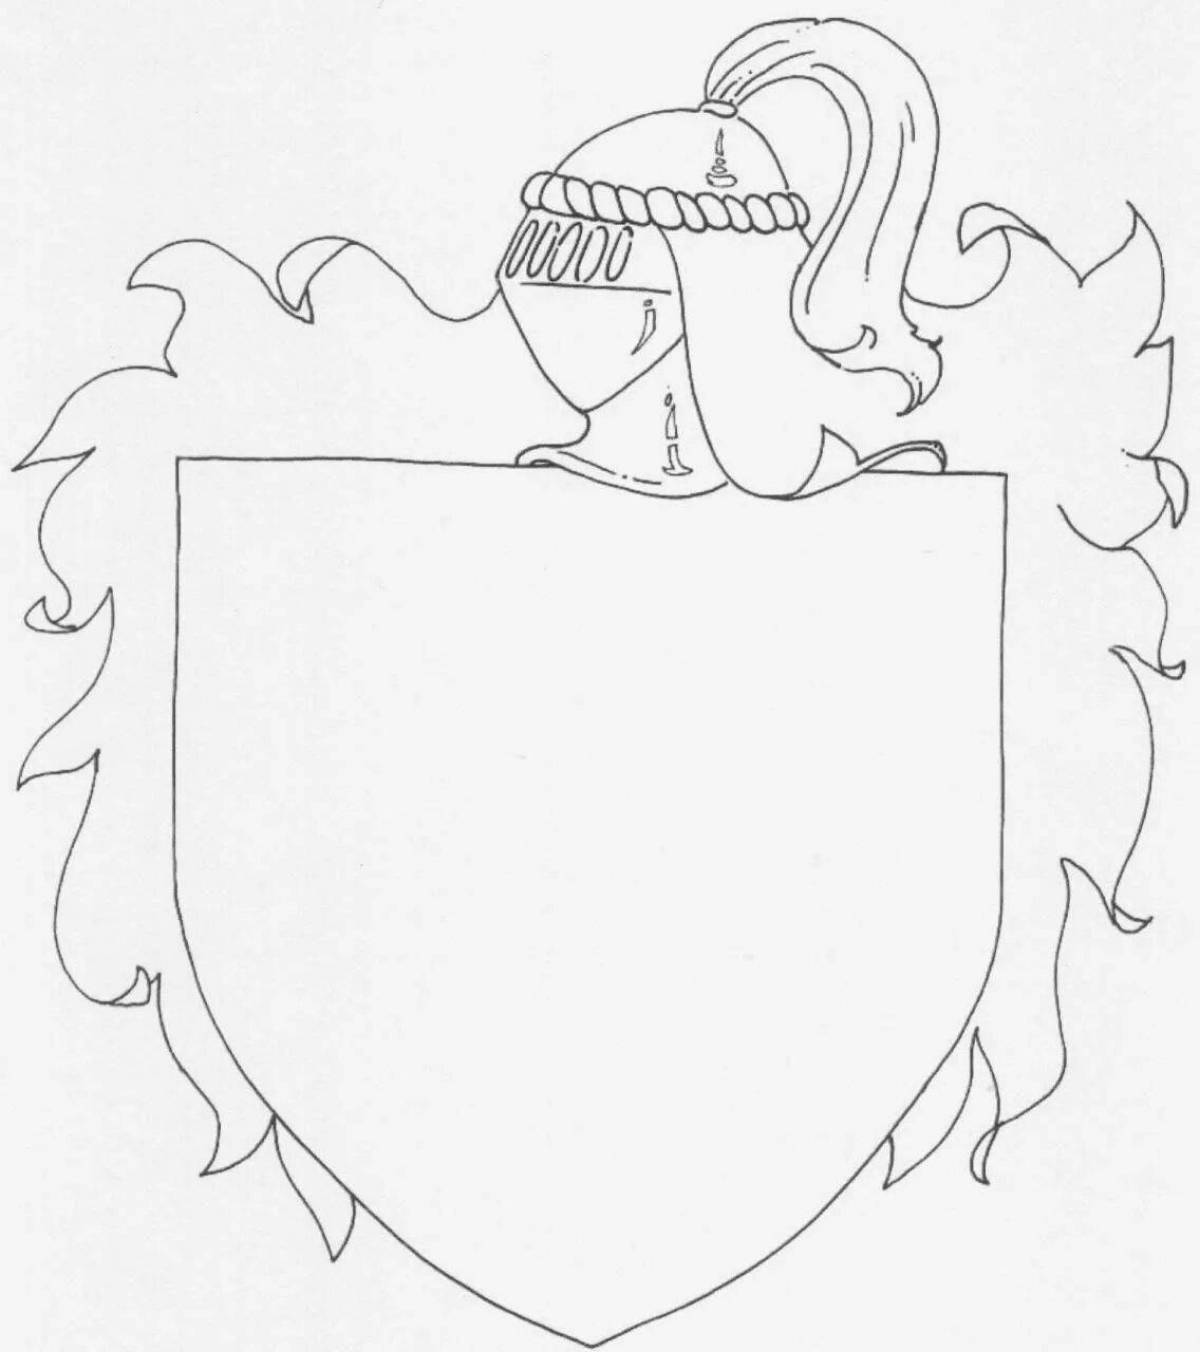 My family coat of arms #6